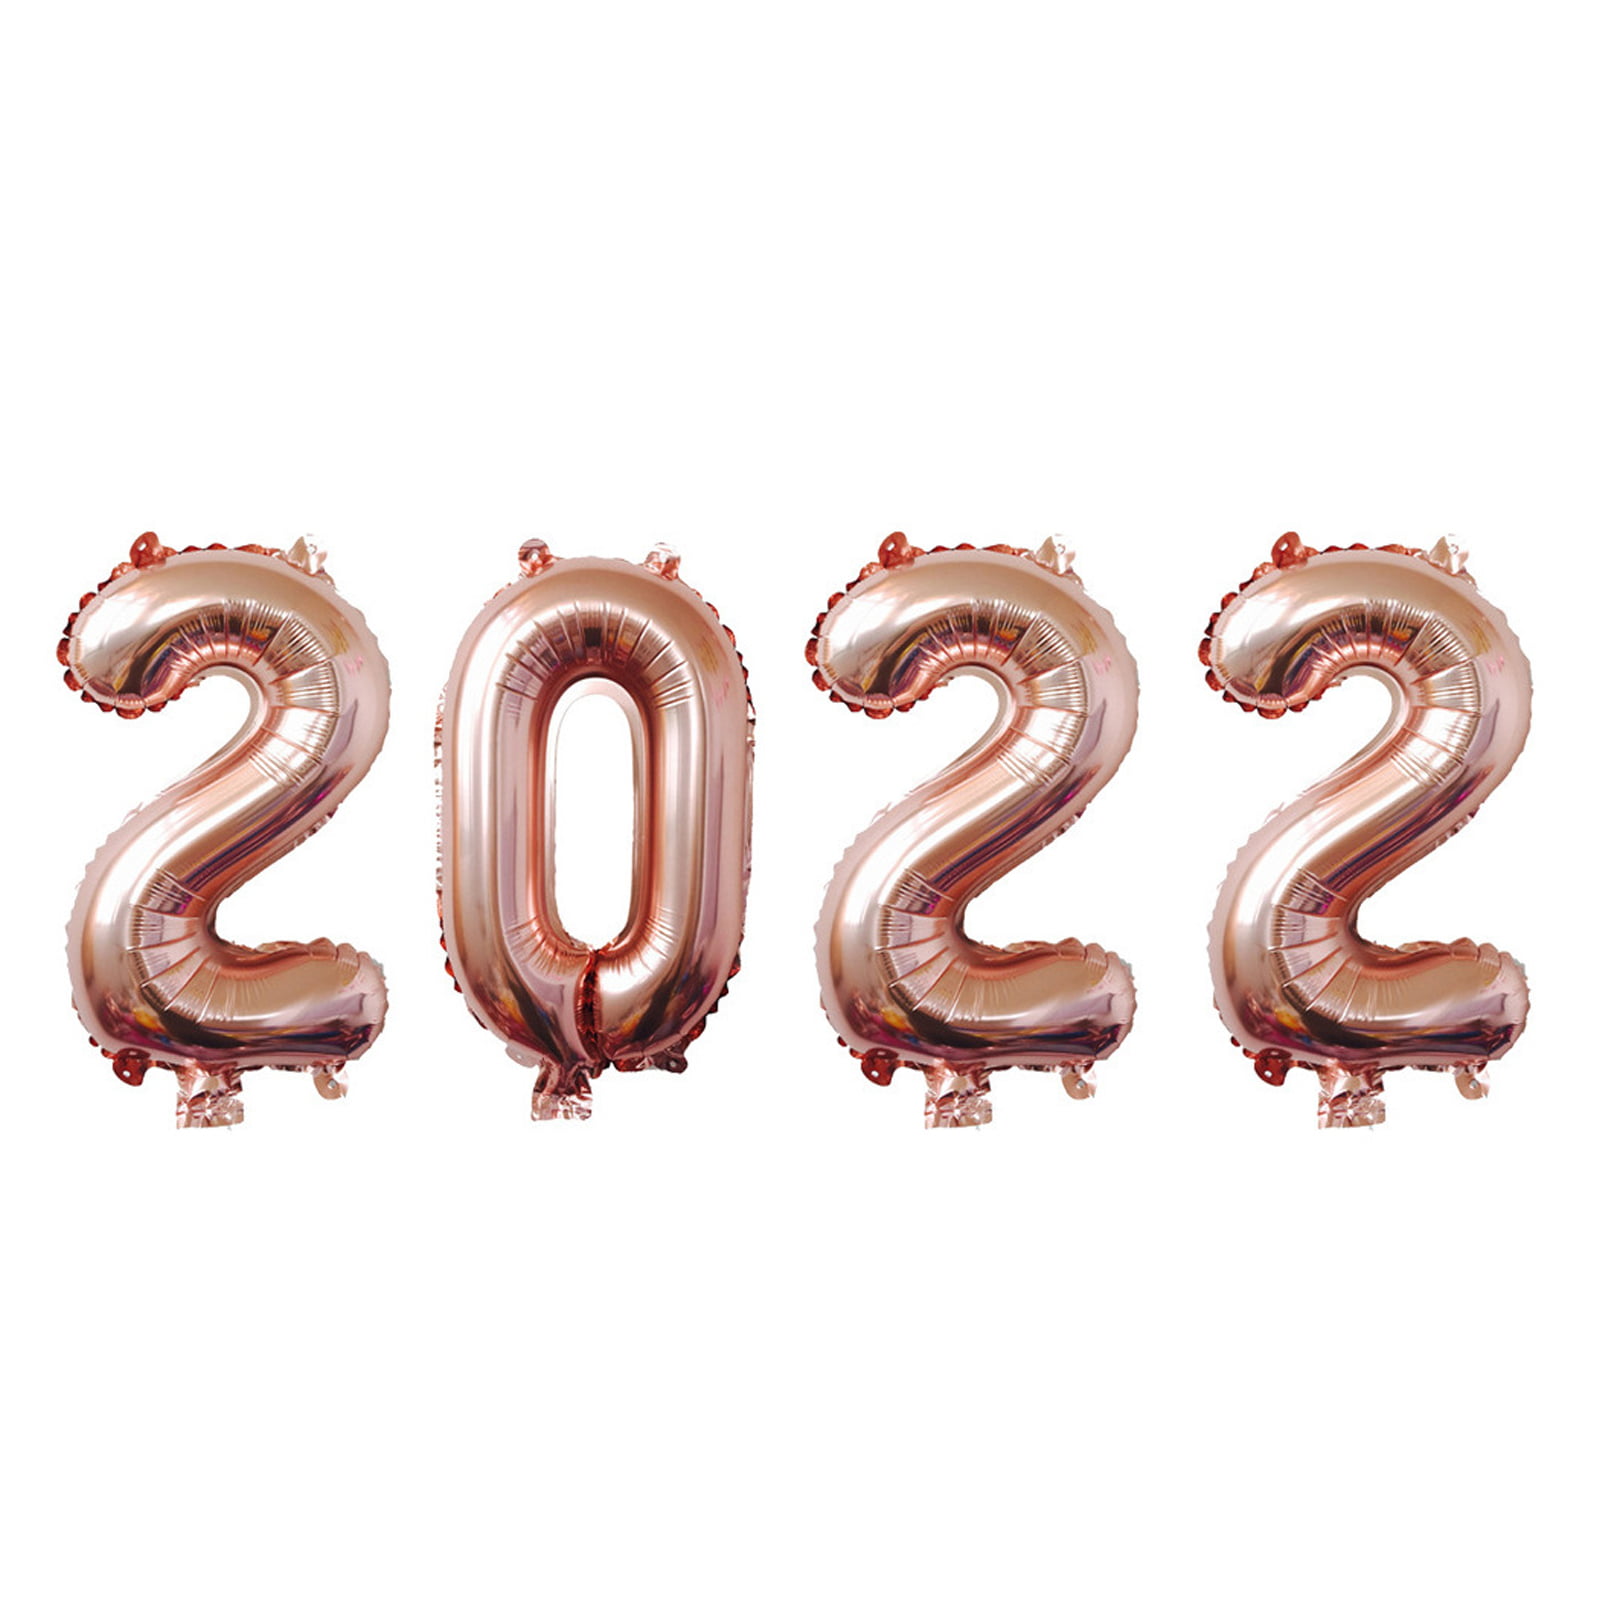 2020 Foil balloons 40"/16" height New year/Graduation 